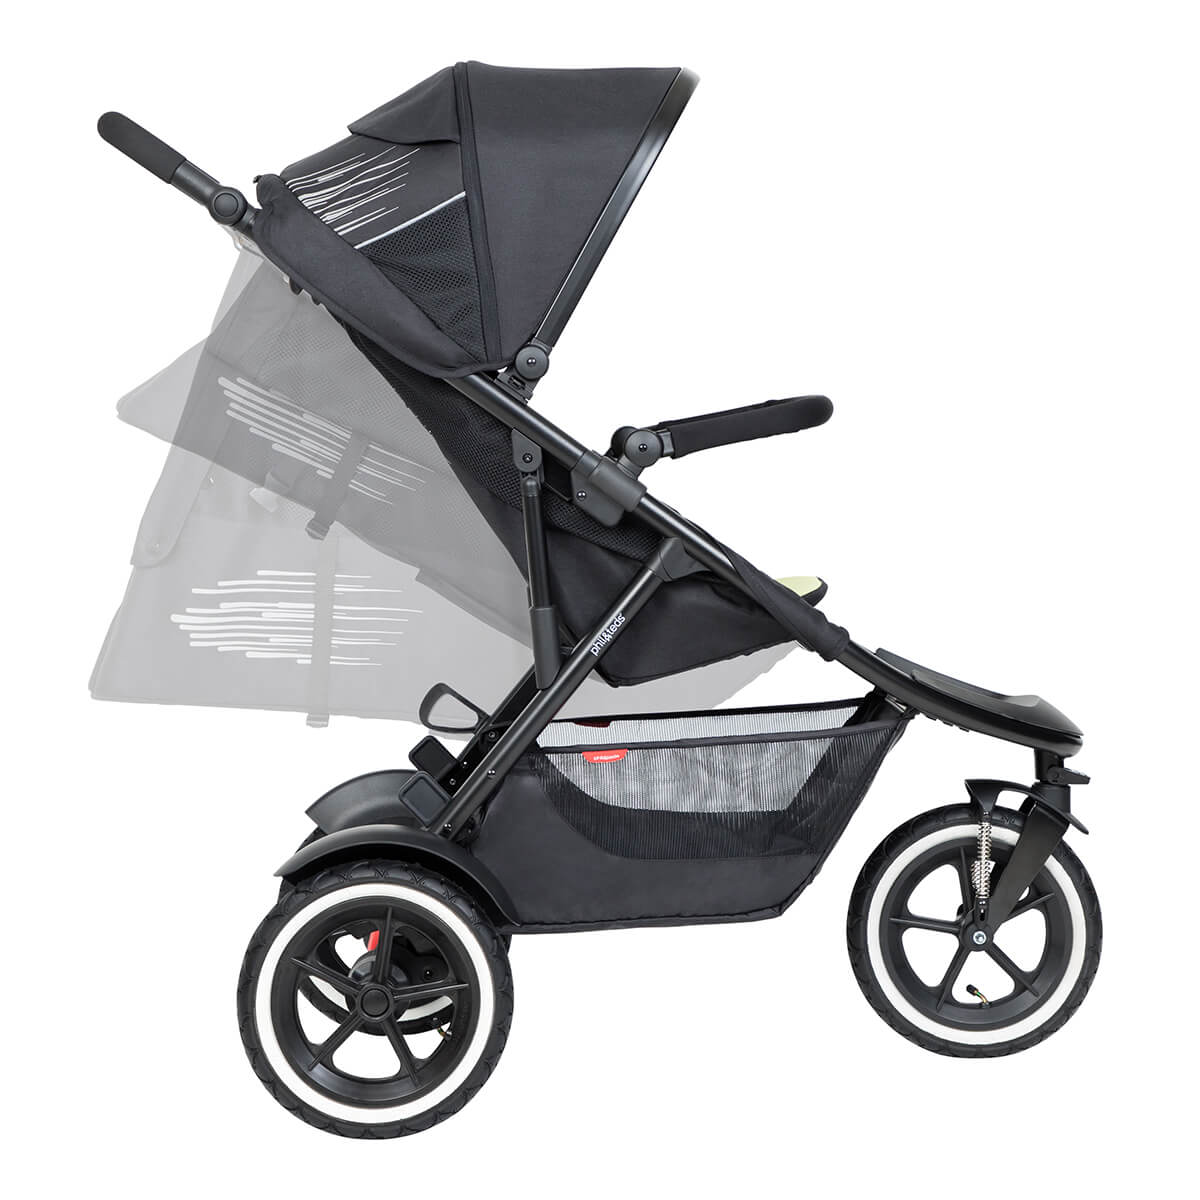 https://cdn.accentuate.io/4509898735693/19466203824322/philteds-sport-buggy-can-recline-in-multiple-angles-including-full-recline-for-newborn-baby-v1626485359363.jpg?1200x1200